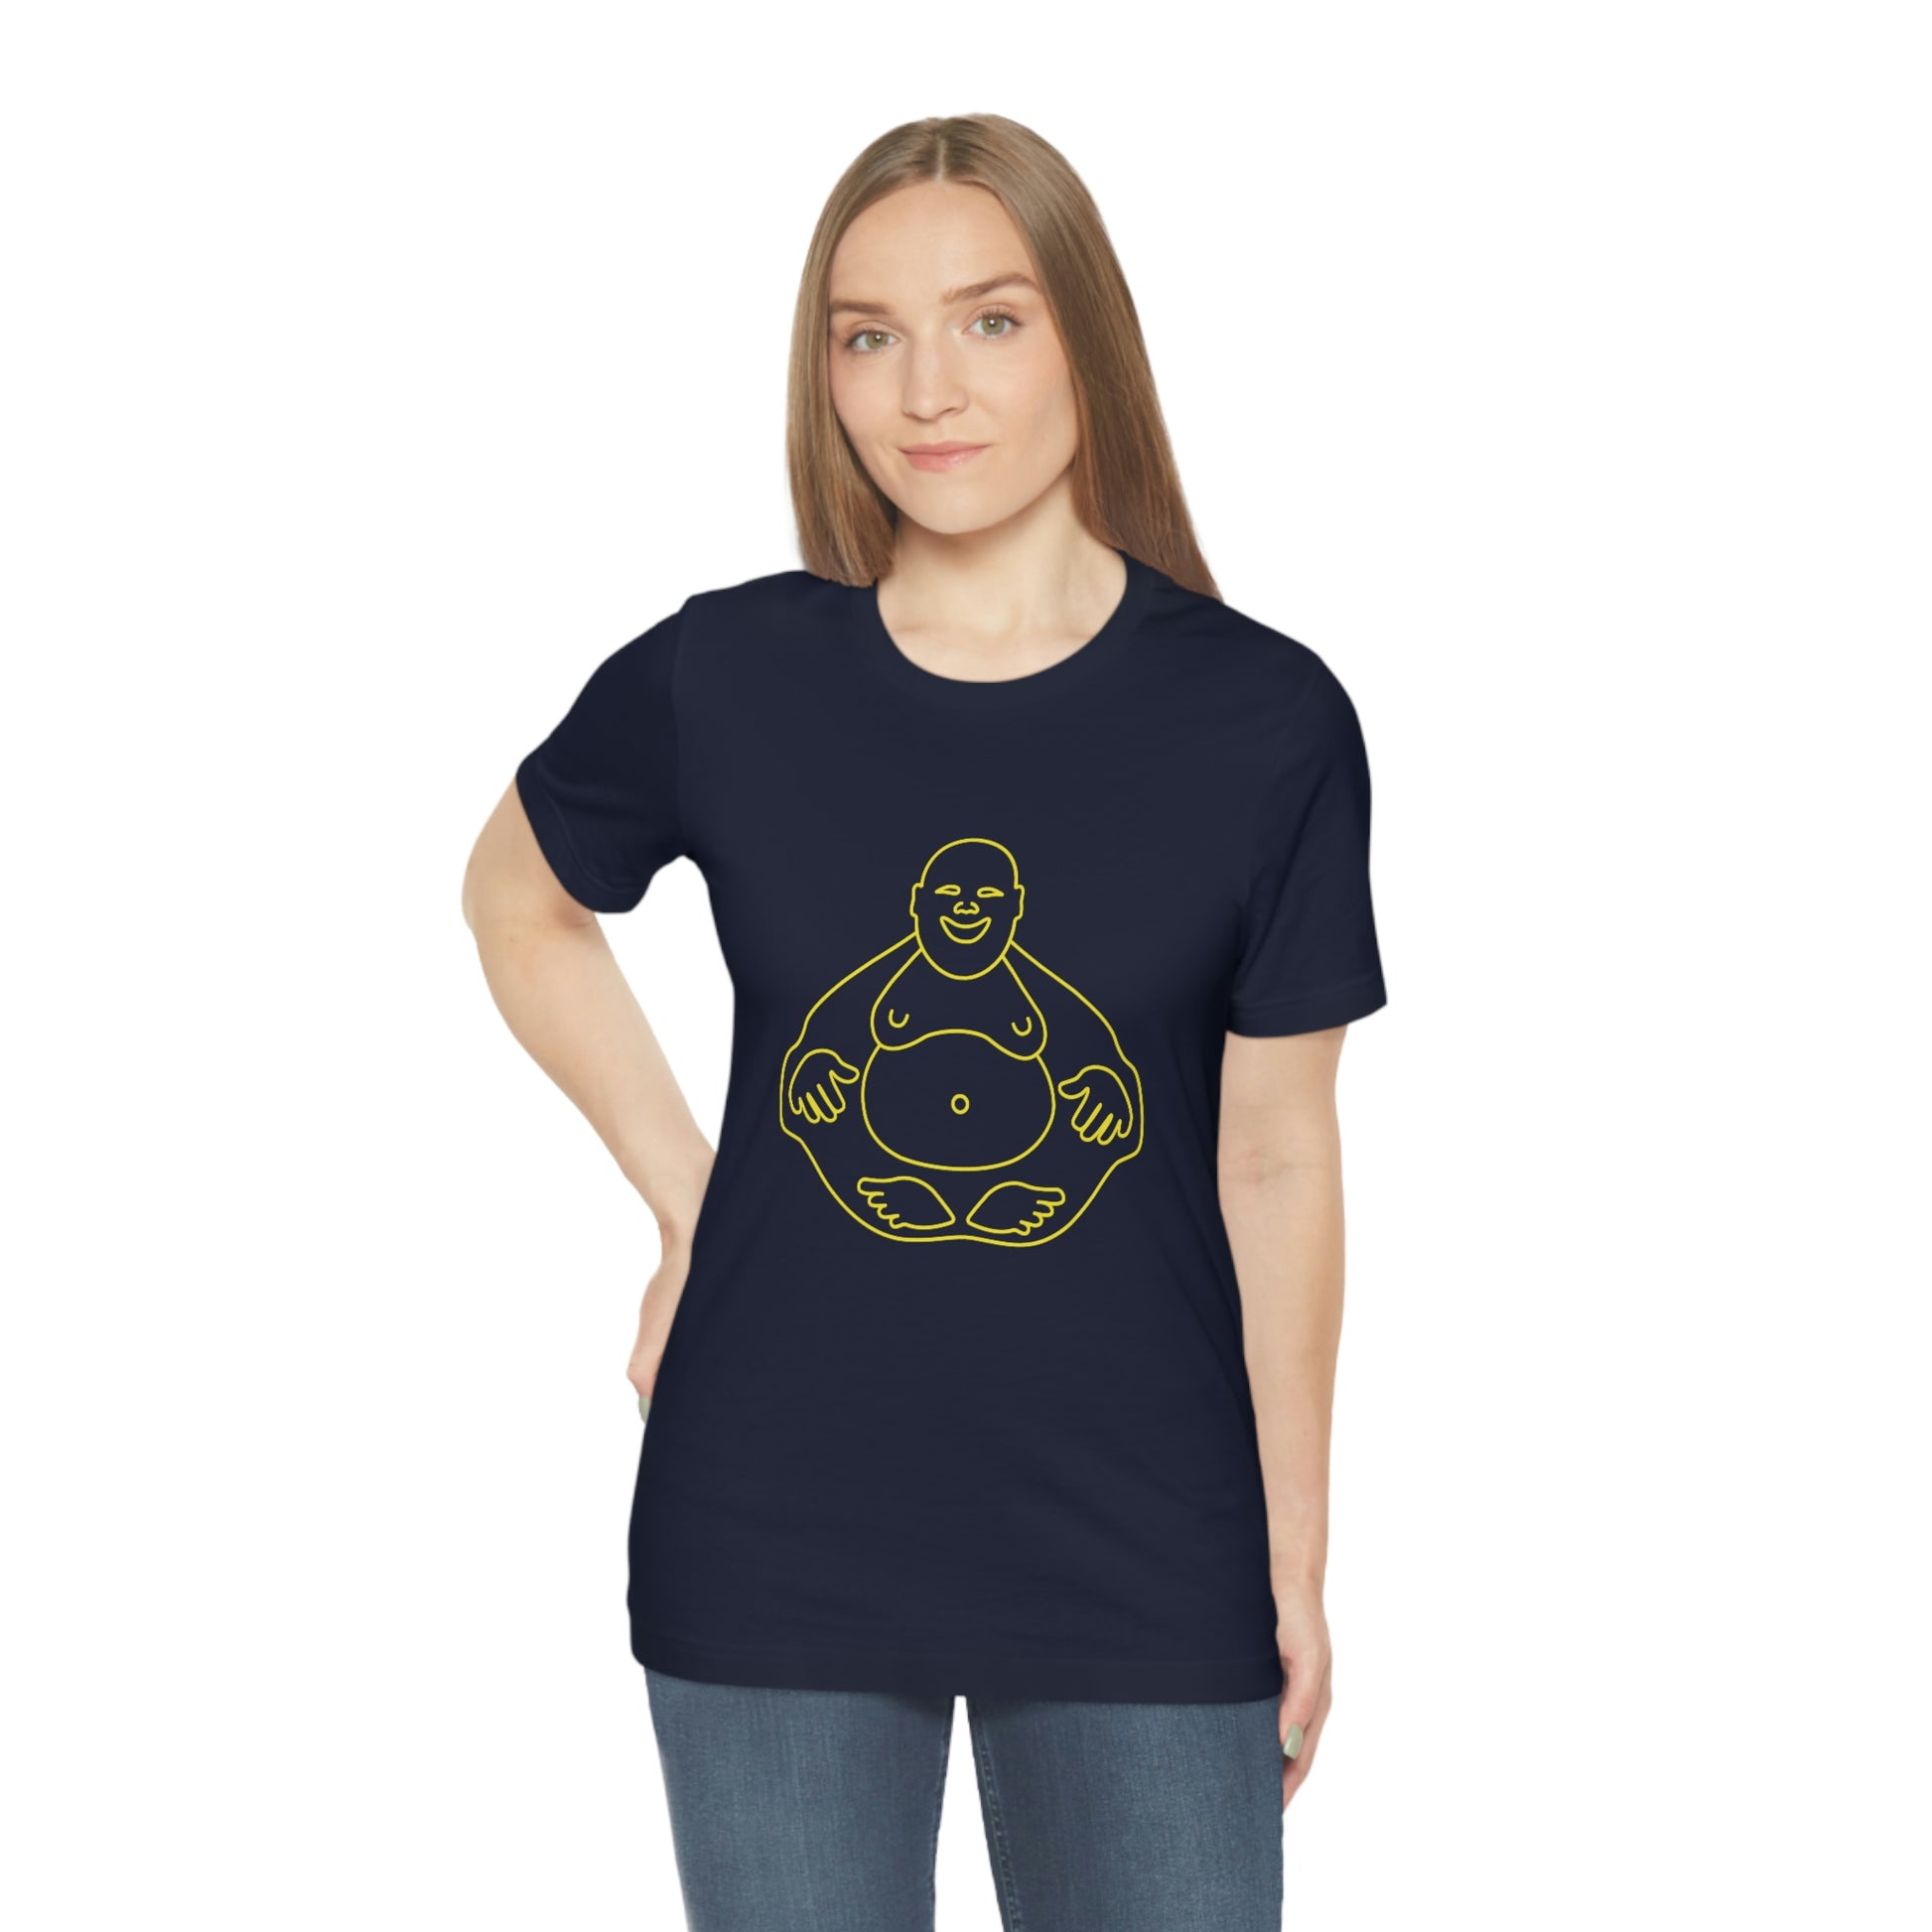 Navy T-Shirt featuring a yellow 'Laughing Buddha' design from the TEQNEON Ha Ha Land collection, exuding joy and humour